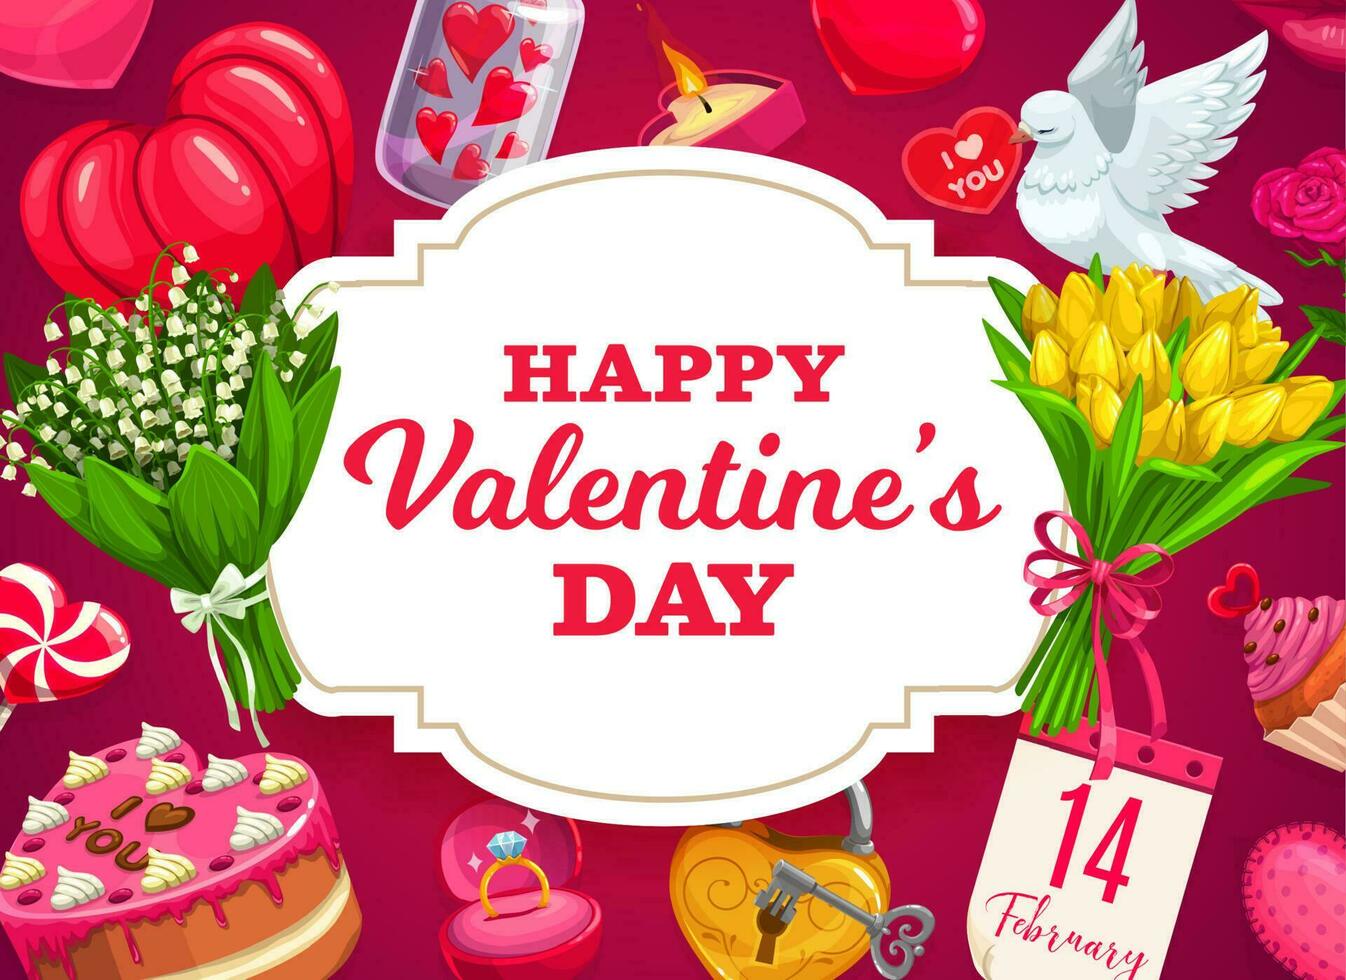 Valentines Day love holiday hearts and flowers vector